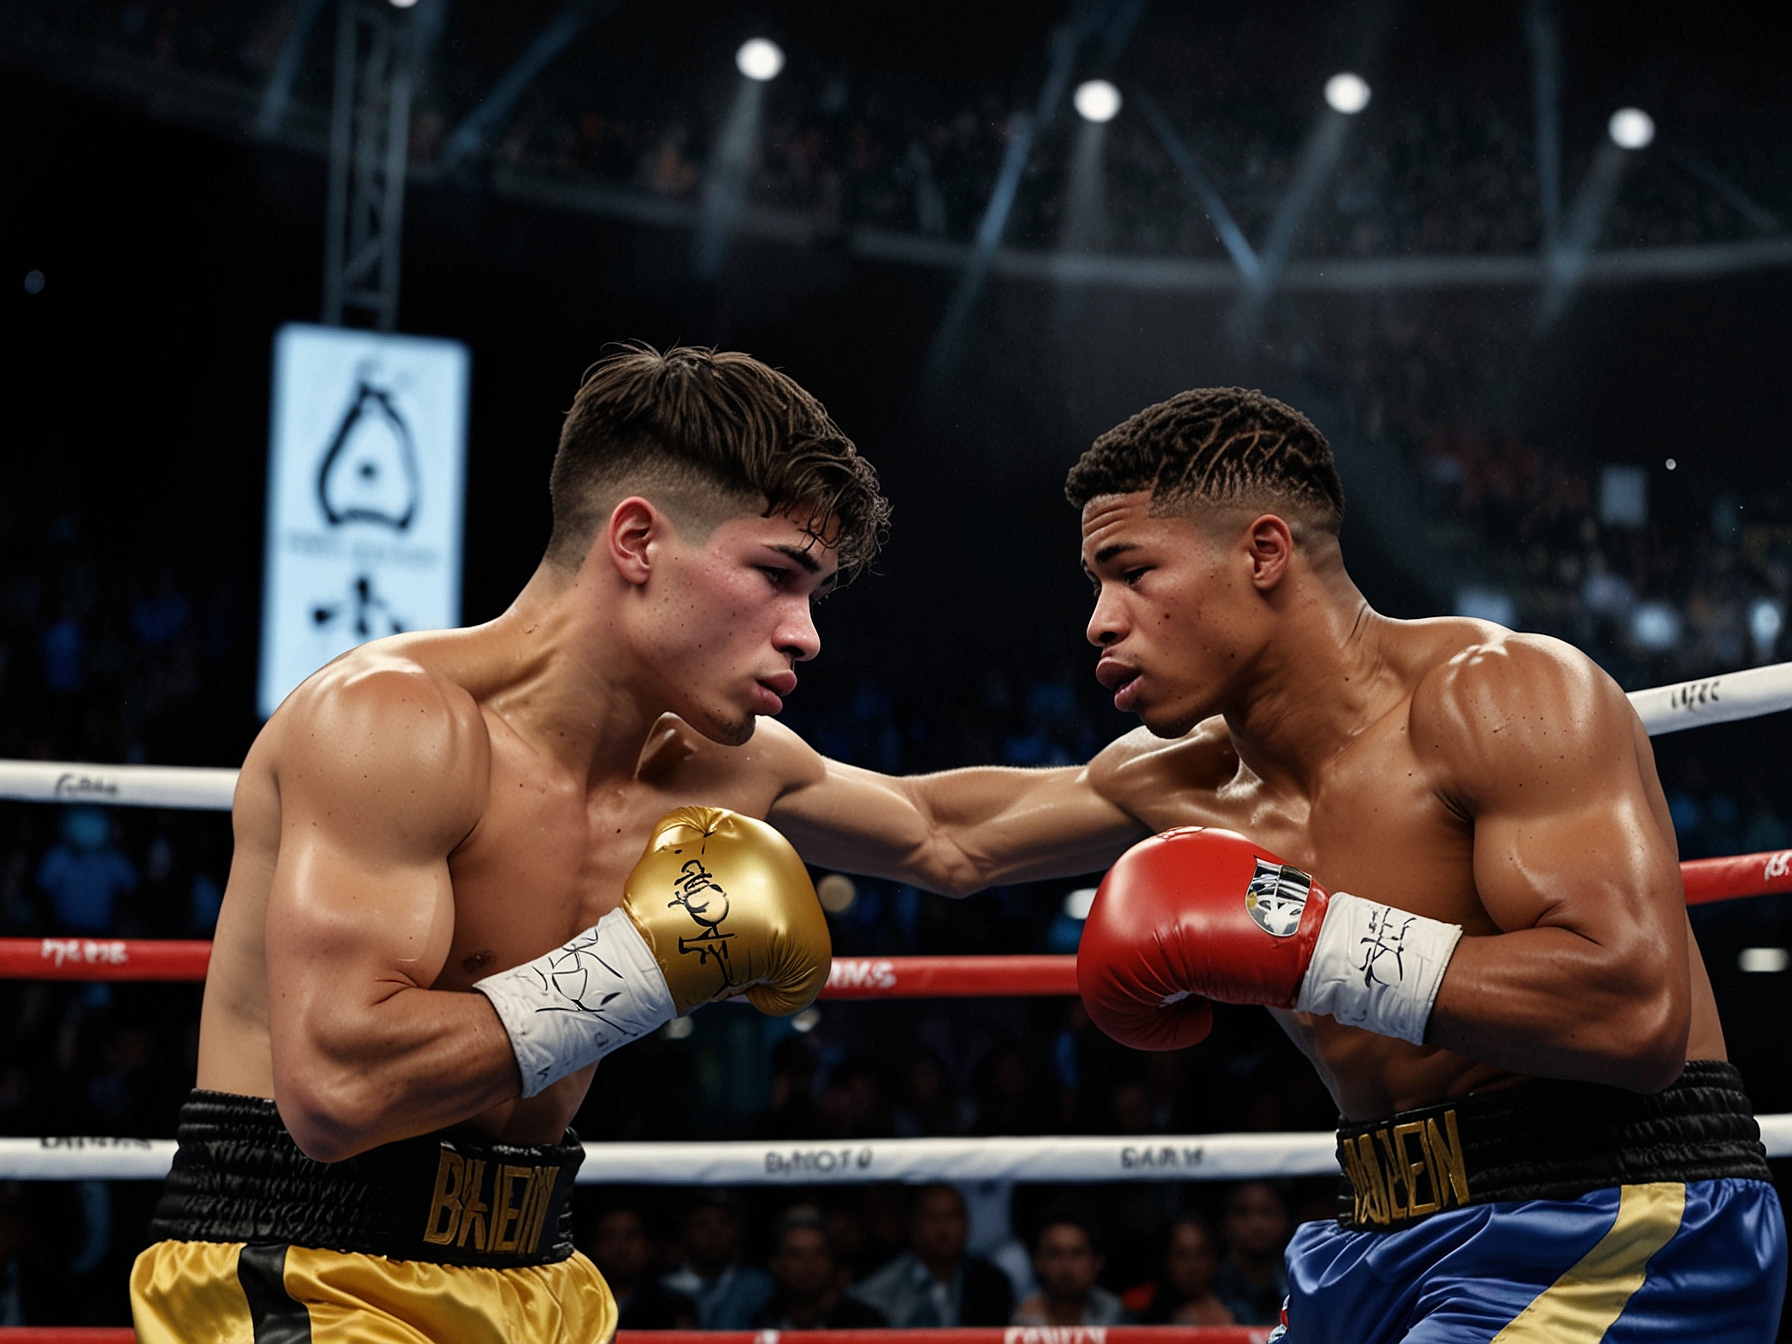 Ryan Garcia in a tense boxing match against Devin Haney, highlighting the intensity of the bout now under scrutiny due to Garcia's doping scandal.